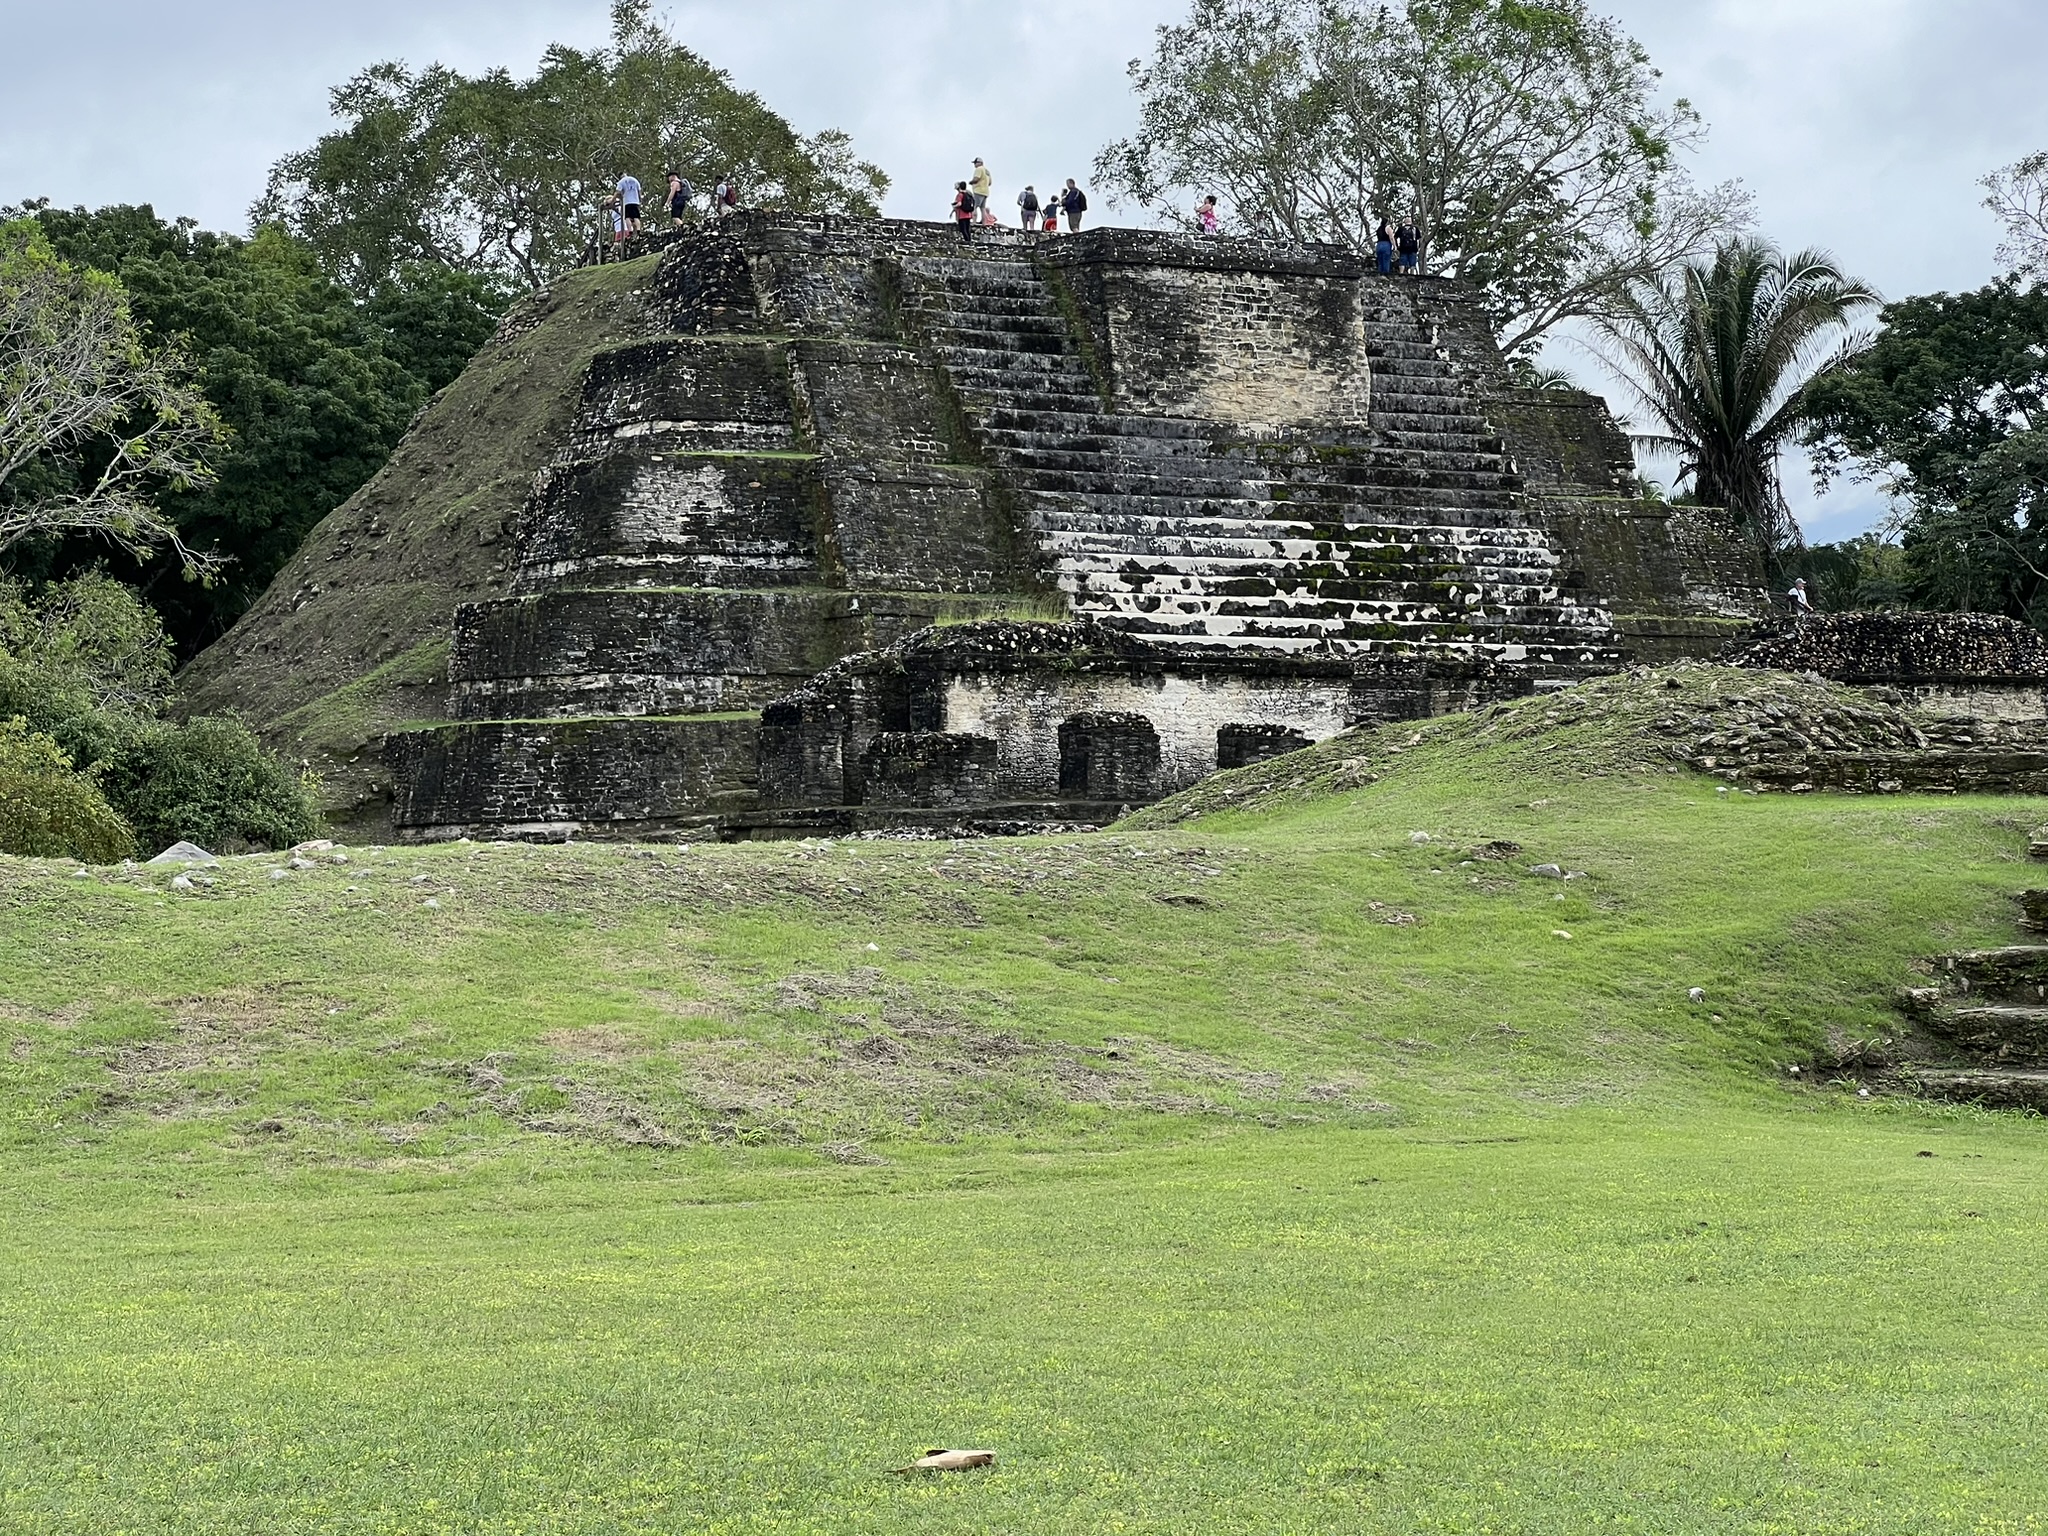 Why You Should Visit the Altun Ha Mayan Ruins During Your Next Cruise to Belize